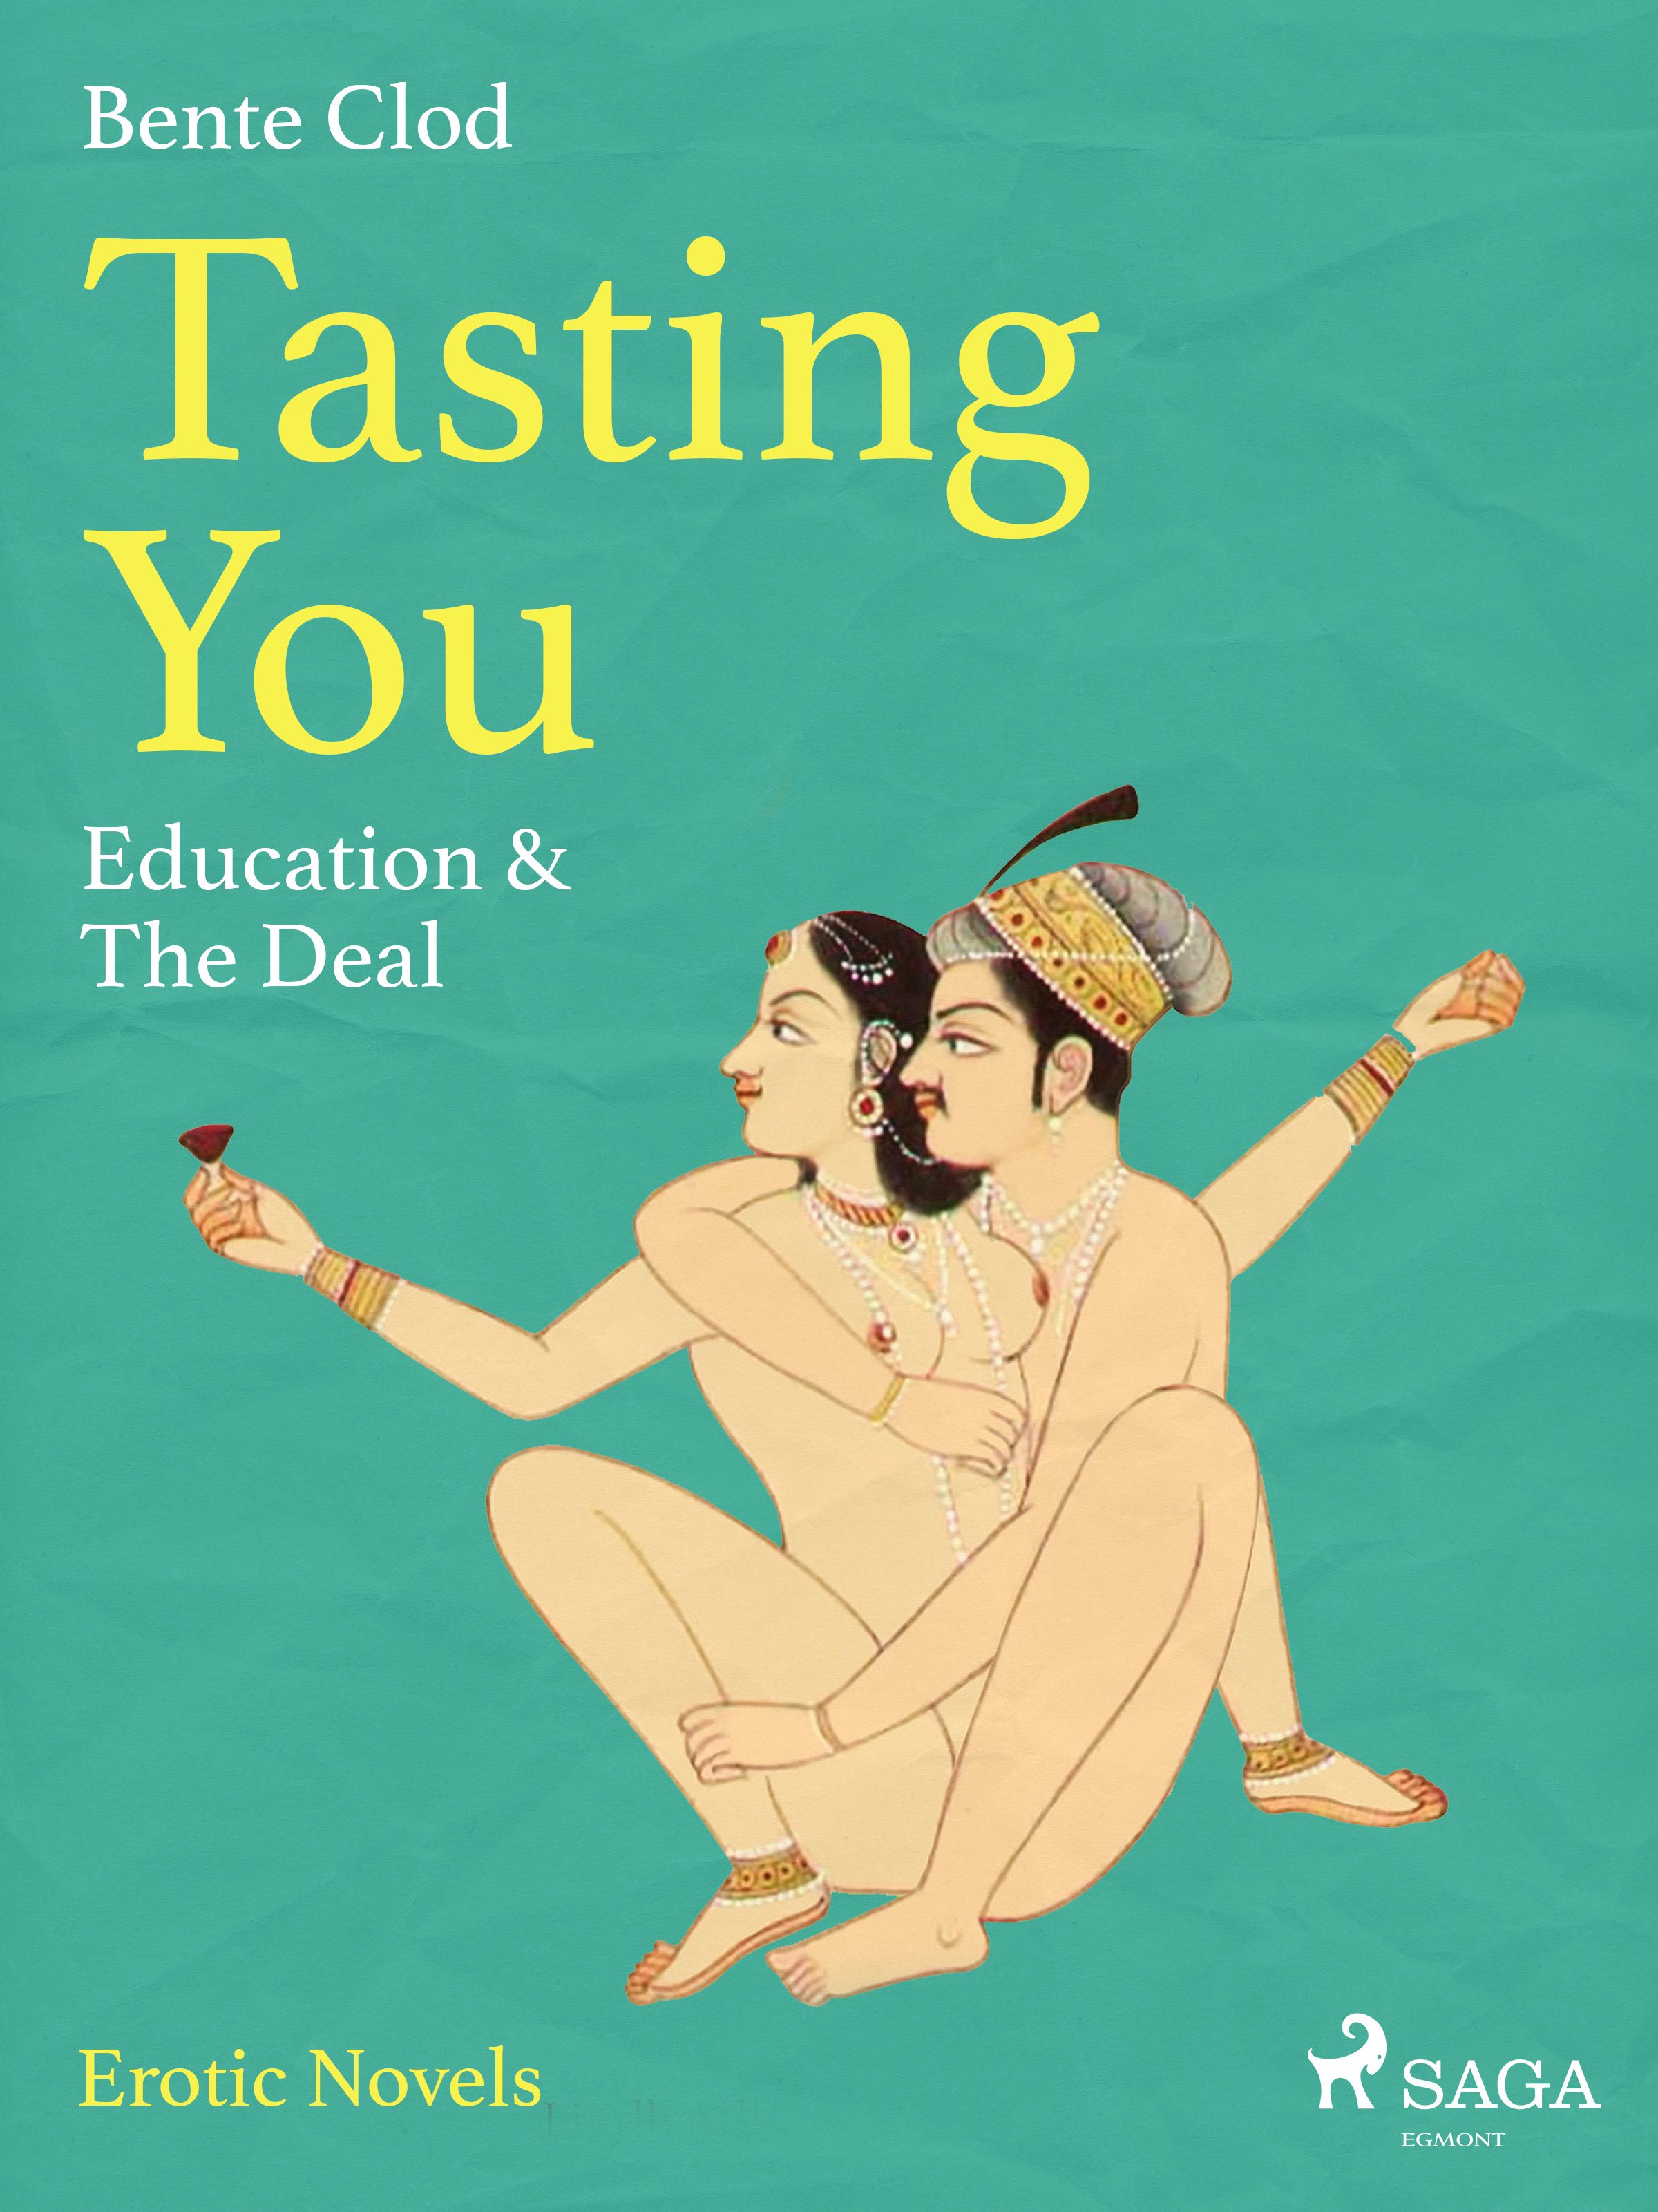 Tasting You: Education & The Deal, eBook by Bente Clod